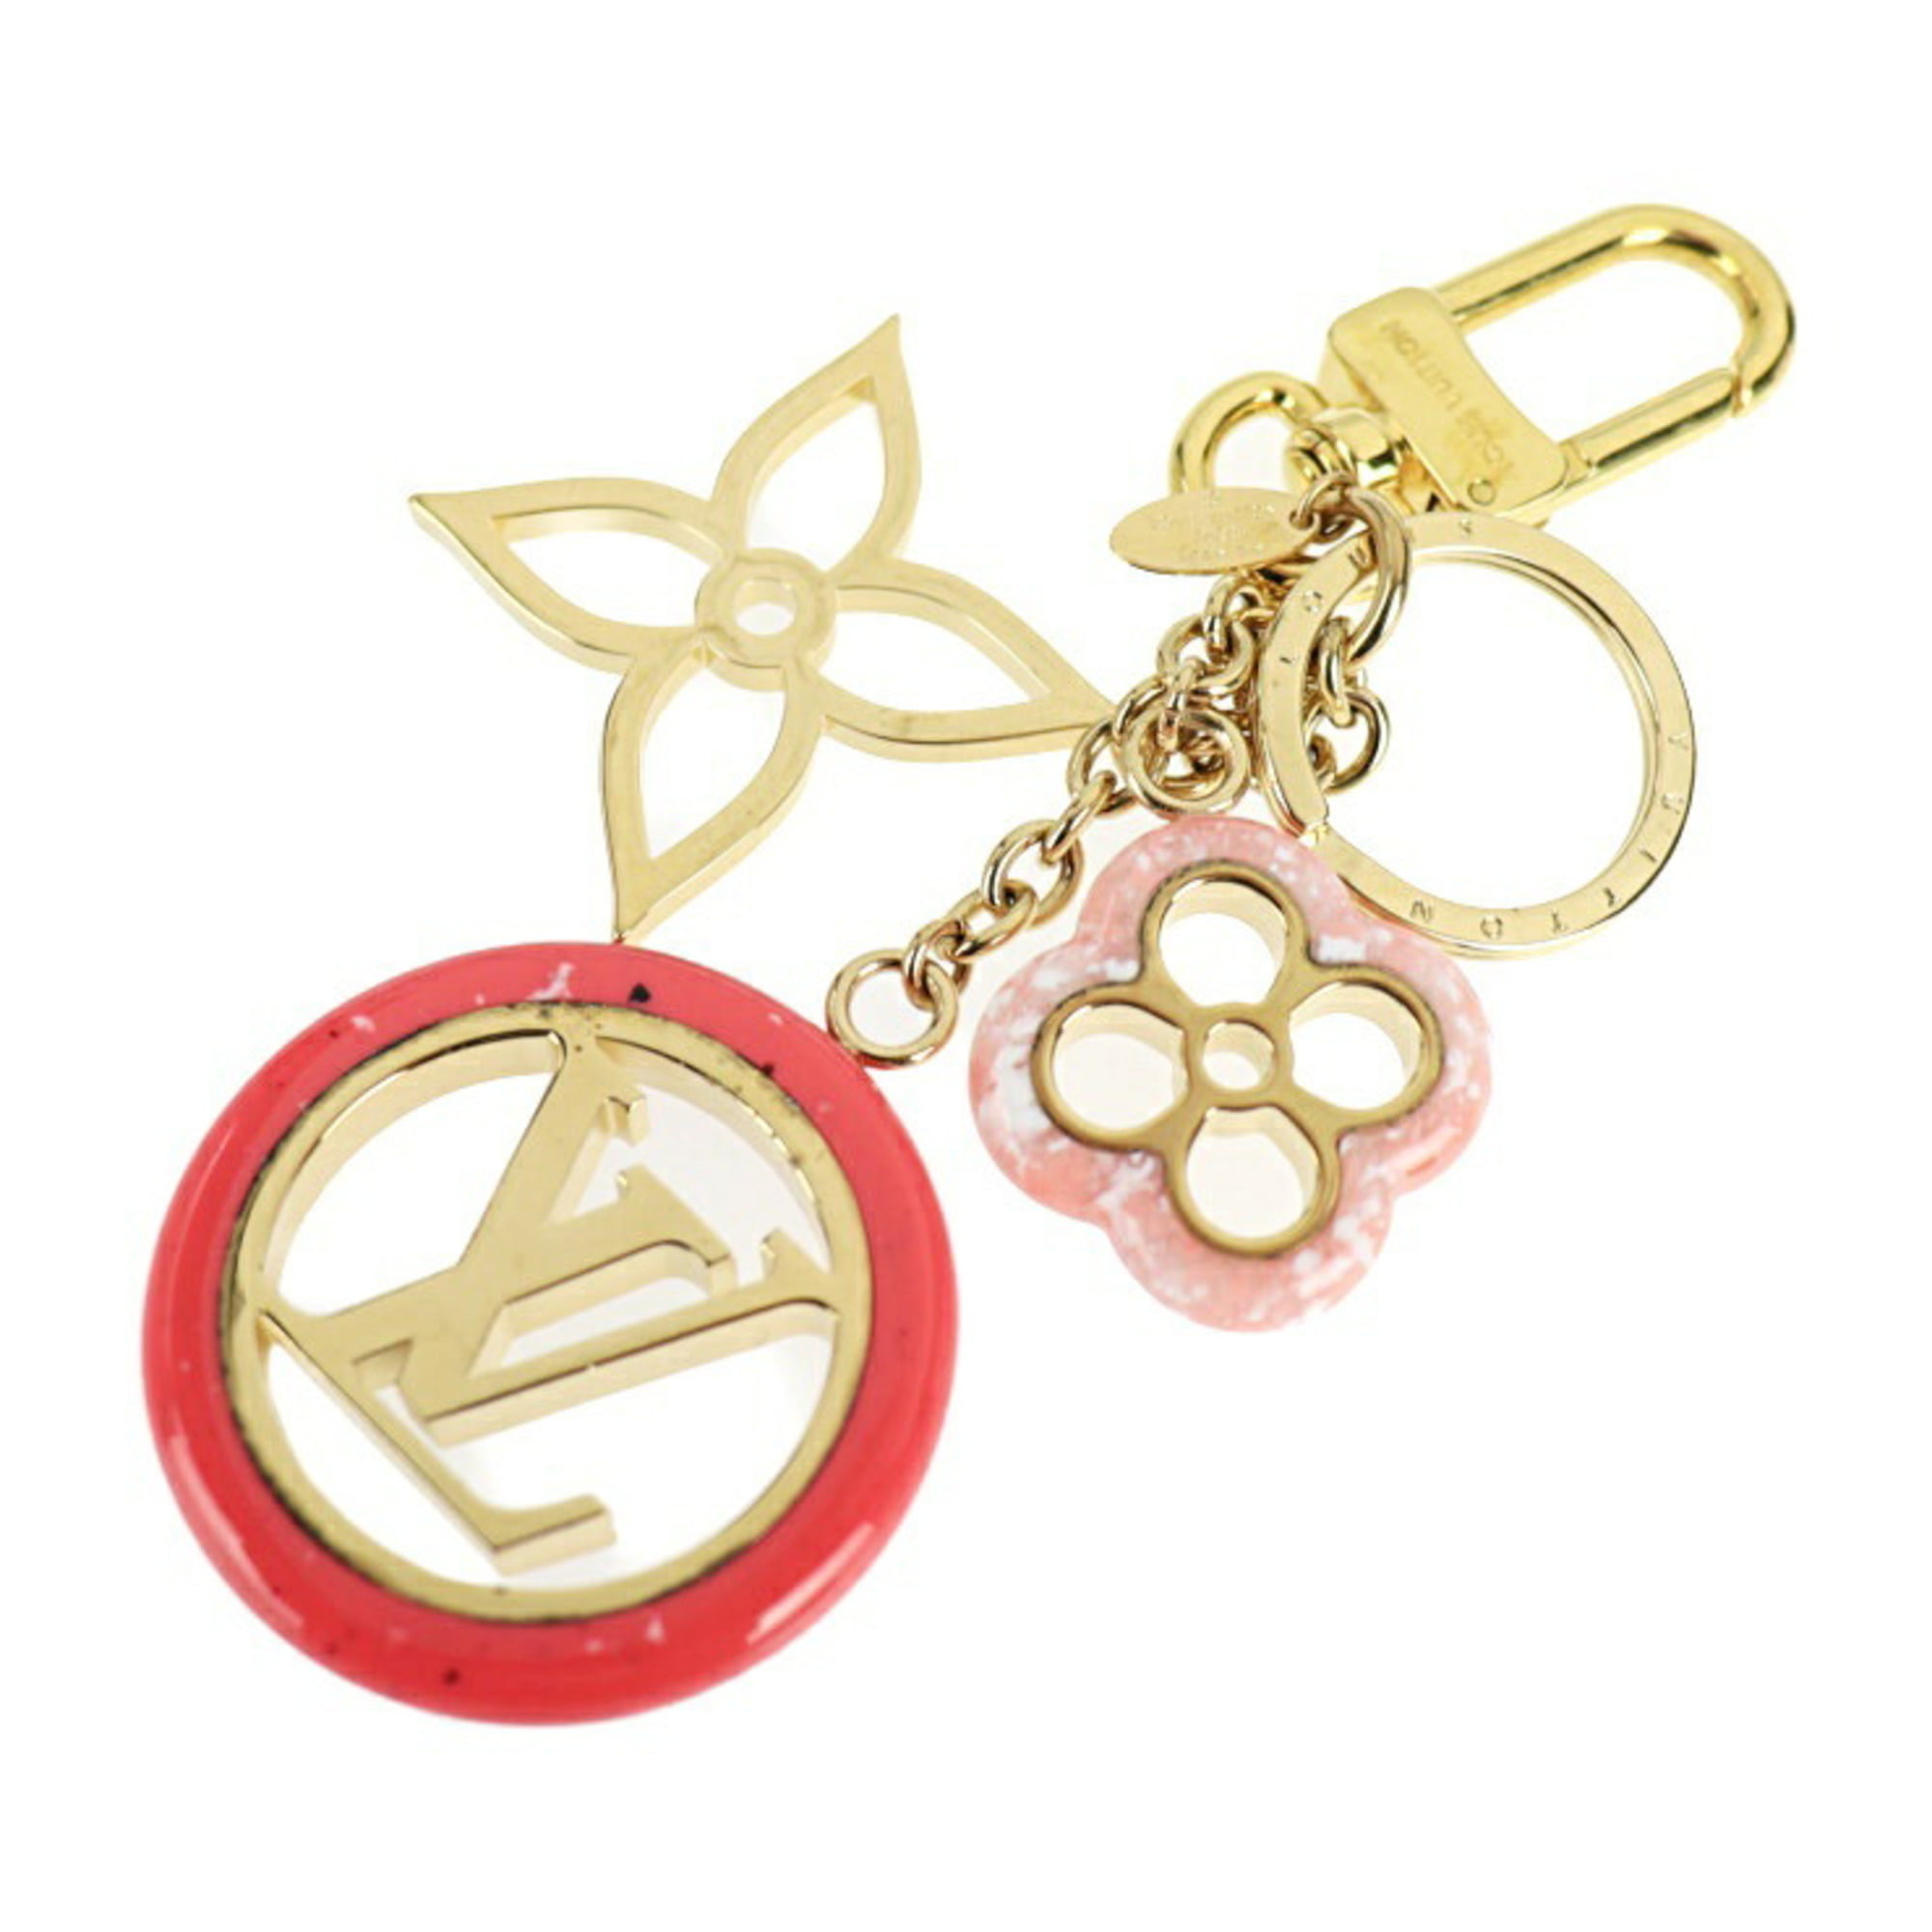 Authenticated used Louis Vuitton Louis Vuitton Portocre Color Line Key Holder M64525 Metal Resin Pink Gold Ring Bag Charm, Adult Unisex, Size: (Hxwxd)